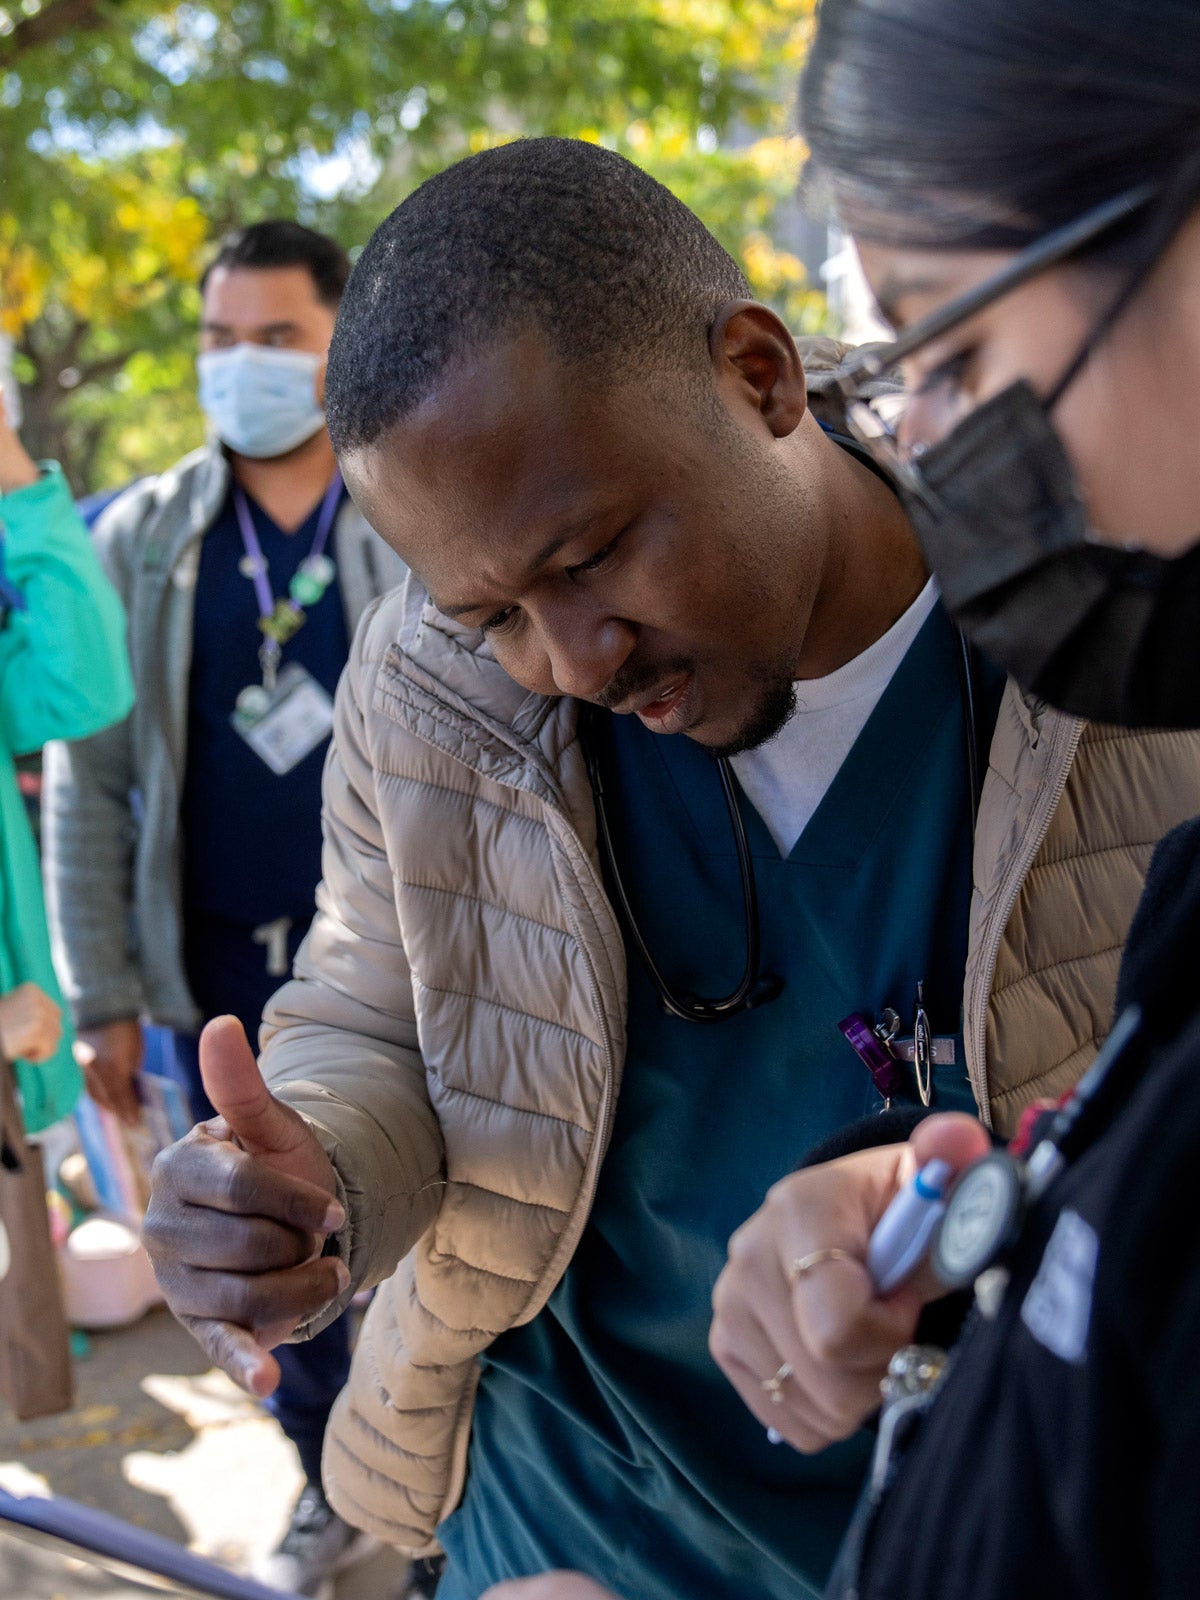 A black immigrant works with a health care worker to fallout a form on a clipboard in an outdoor urban area. Other health care workers stand in the background.